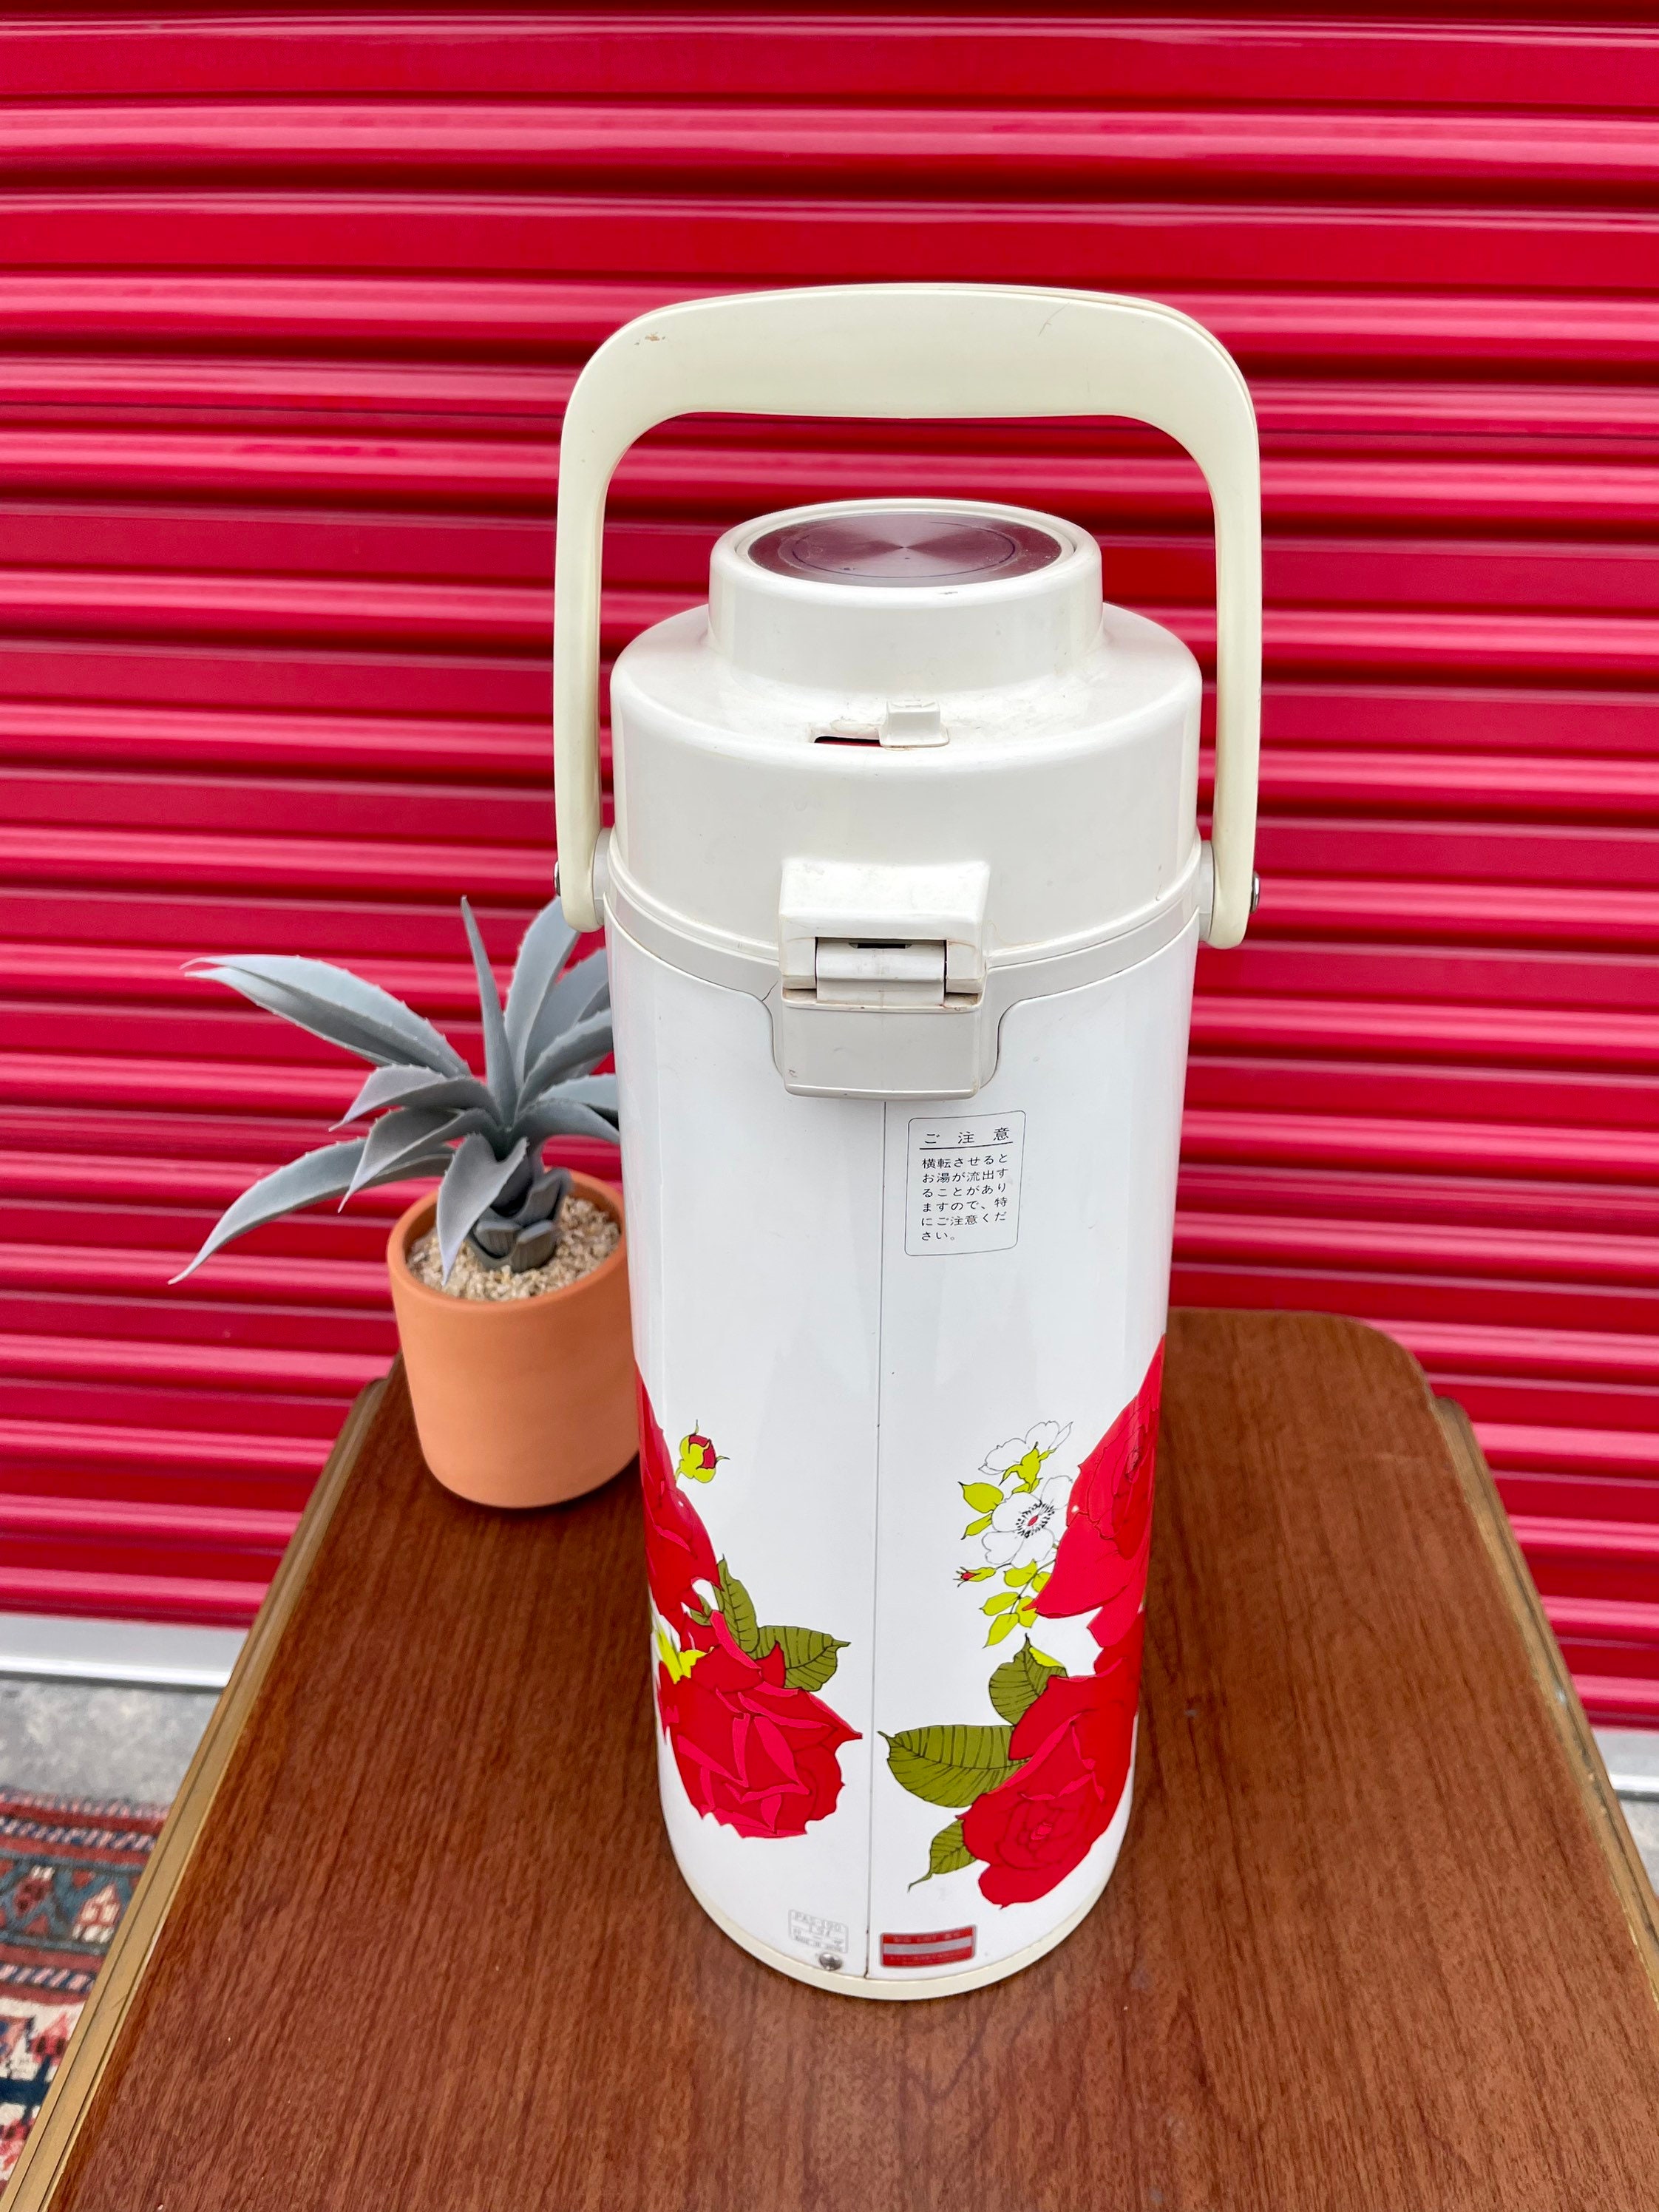 Vintage Armbee Airpot Retro Flowers Thermos Canister Hot Cold Tea Coffee  Beverages for Sale in Garden Grove, CA - OfferUp